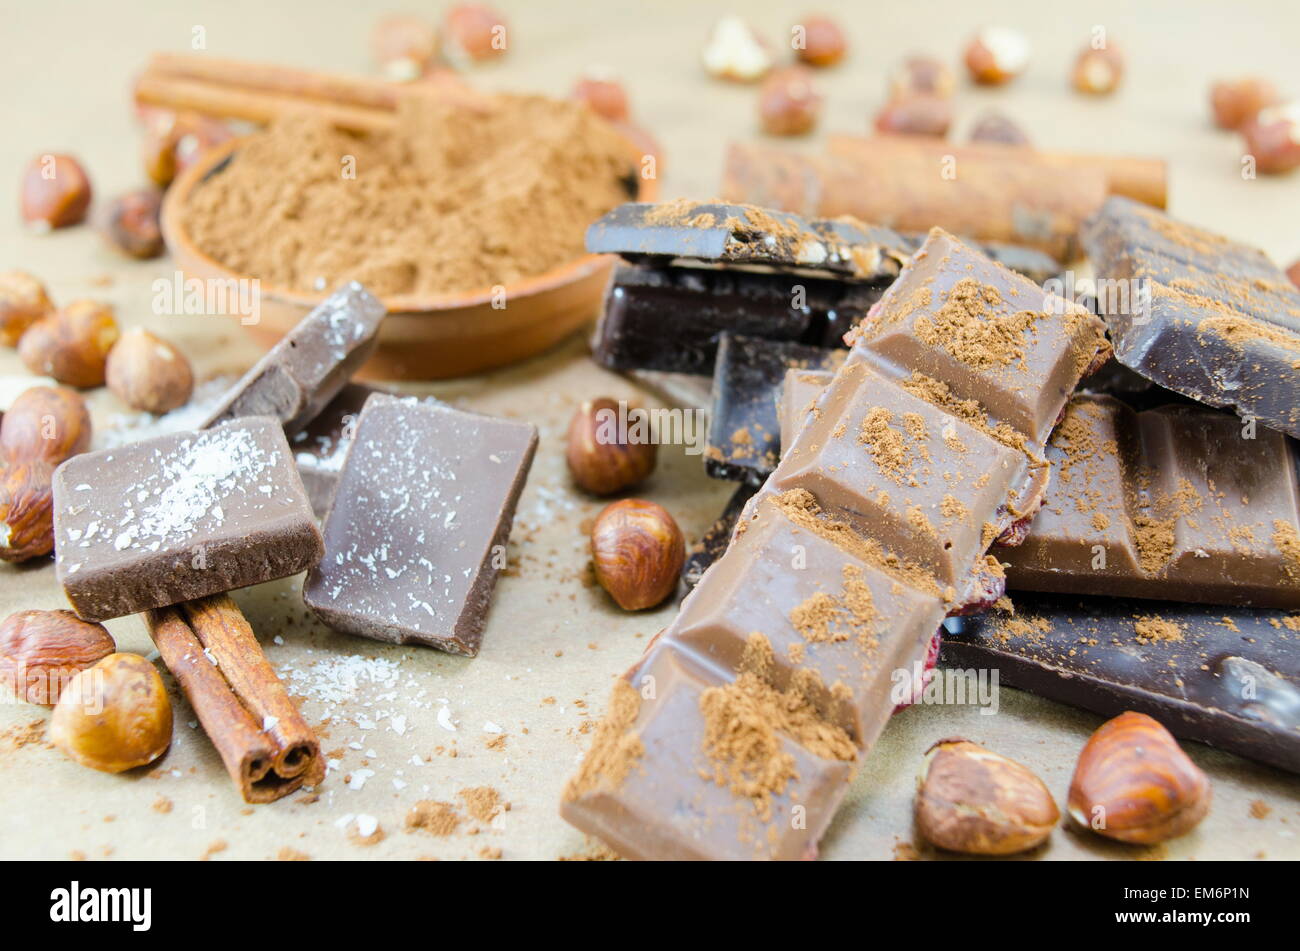 Bunch of chocolate sticks, cinnamon and hazelnuts on a table Stock Photo